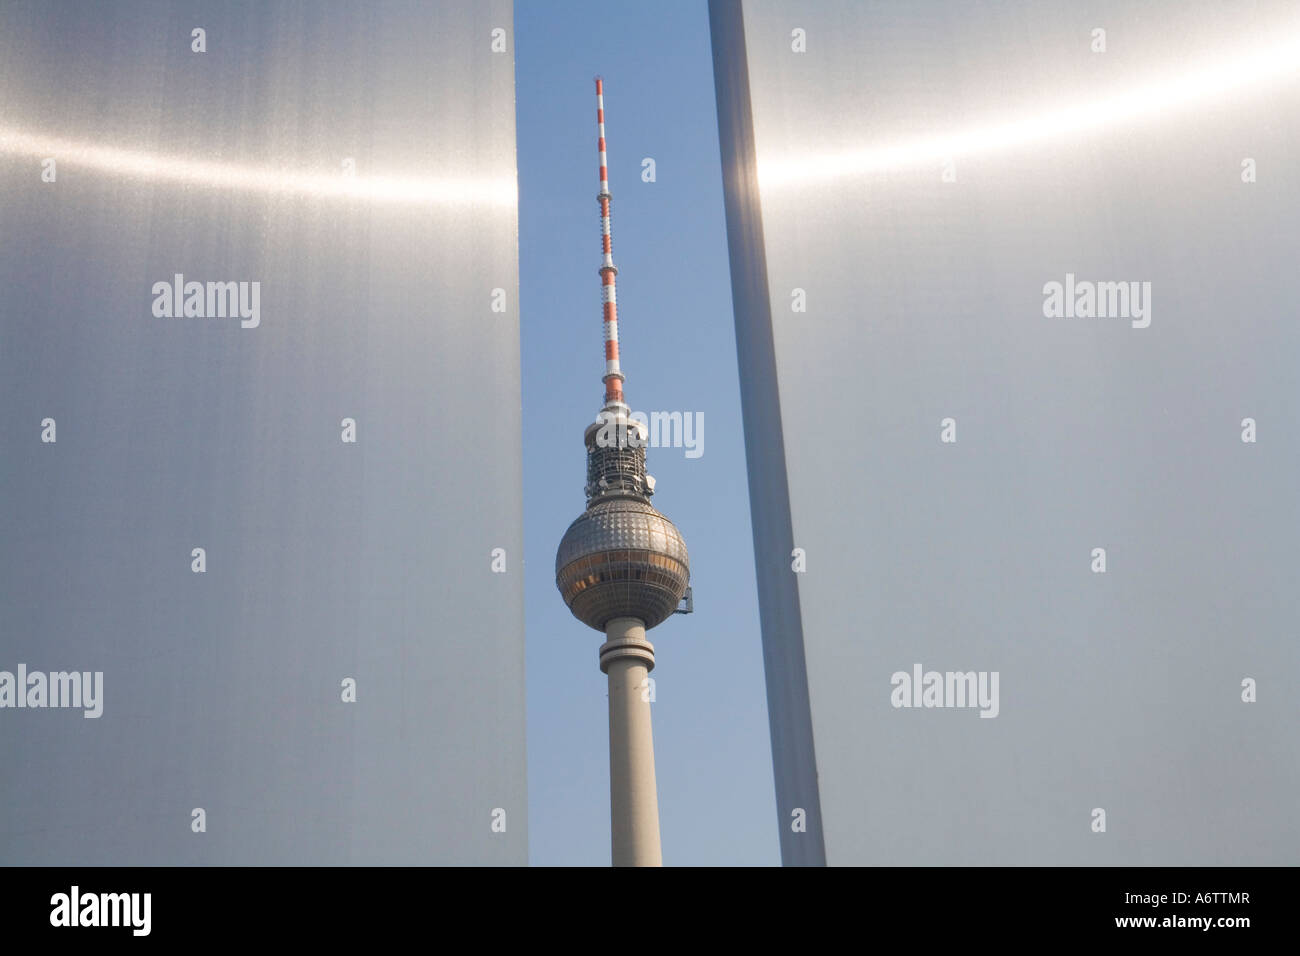 TV tower, seen through a gap between two info boards of Marx Engels forum, Berlin, Germany, Europe Stock Photo